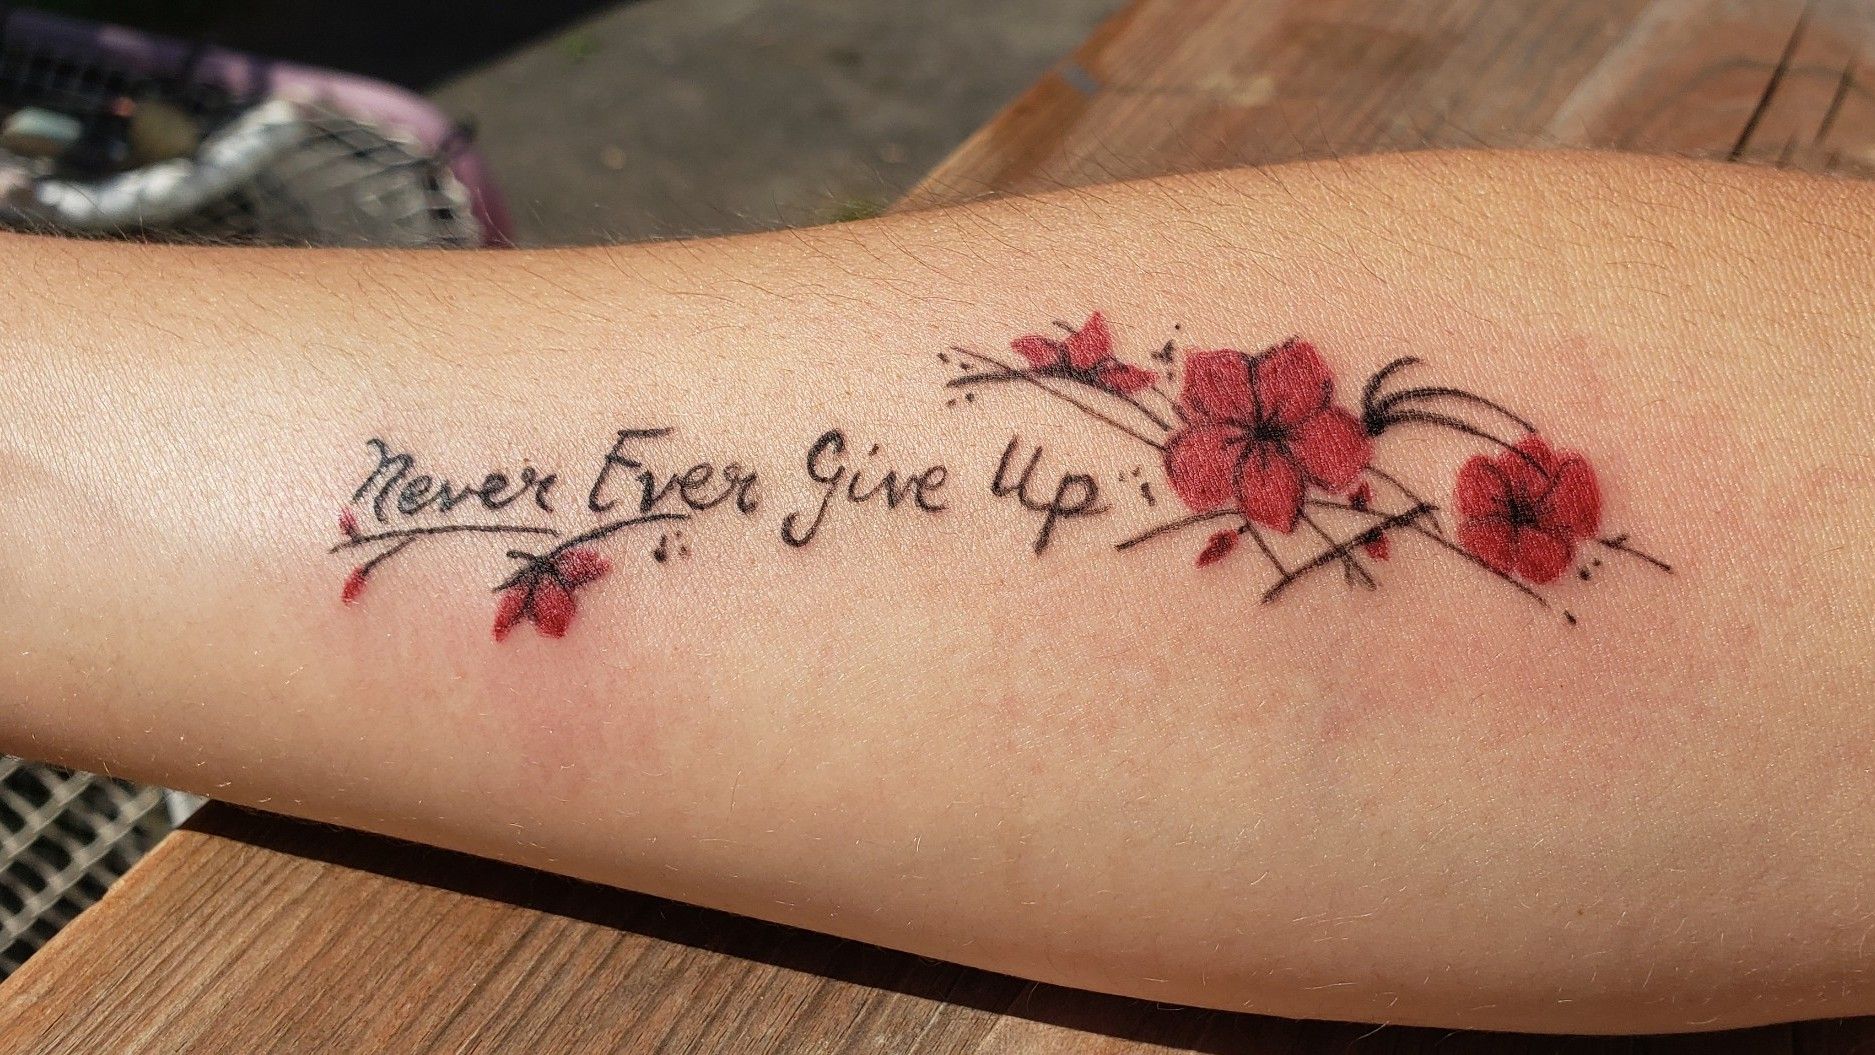 Never Give Up Temporary Tattoo Sticker - OhMyTat